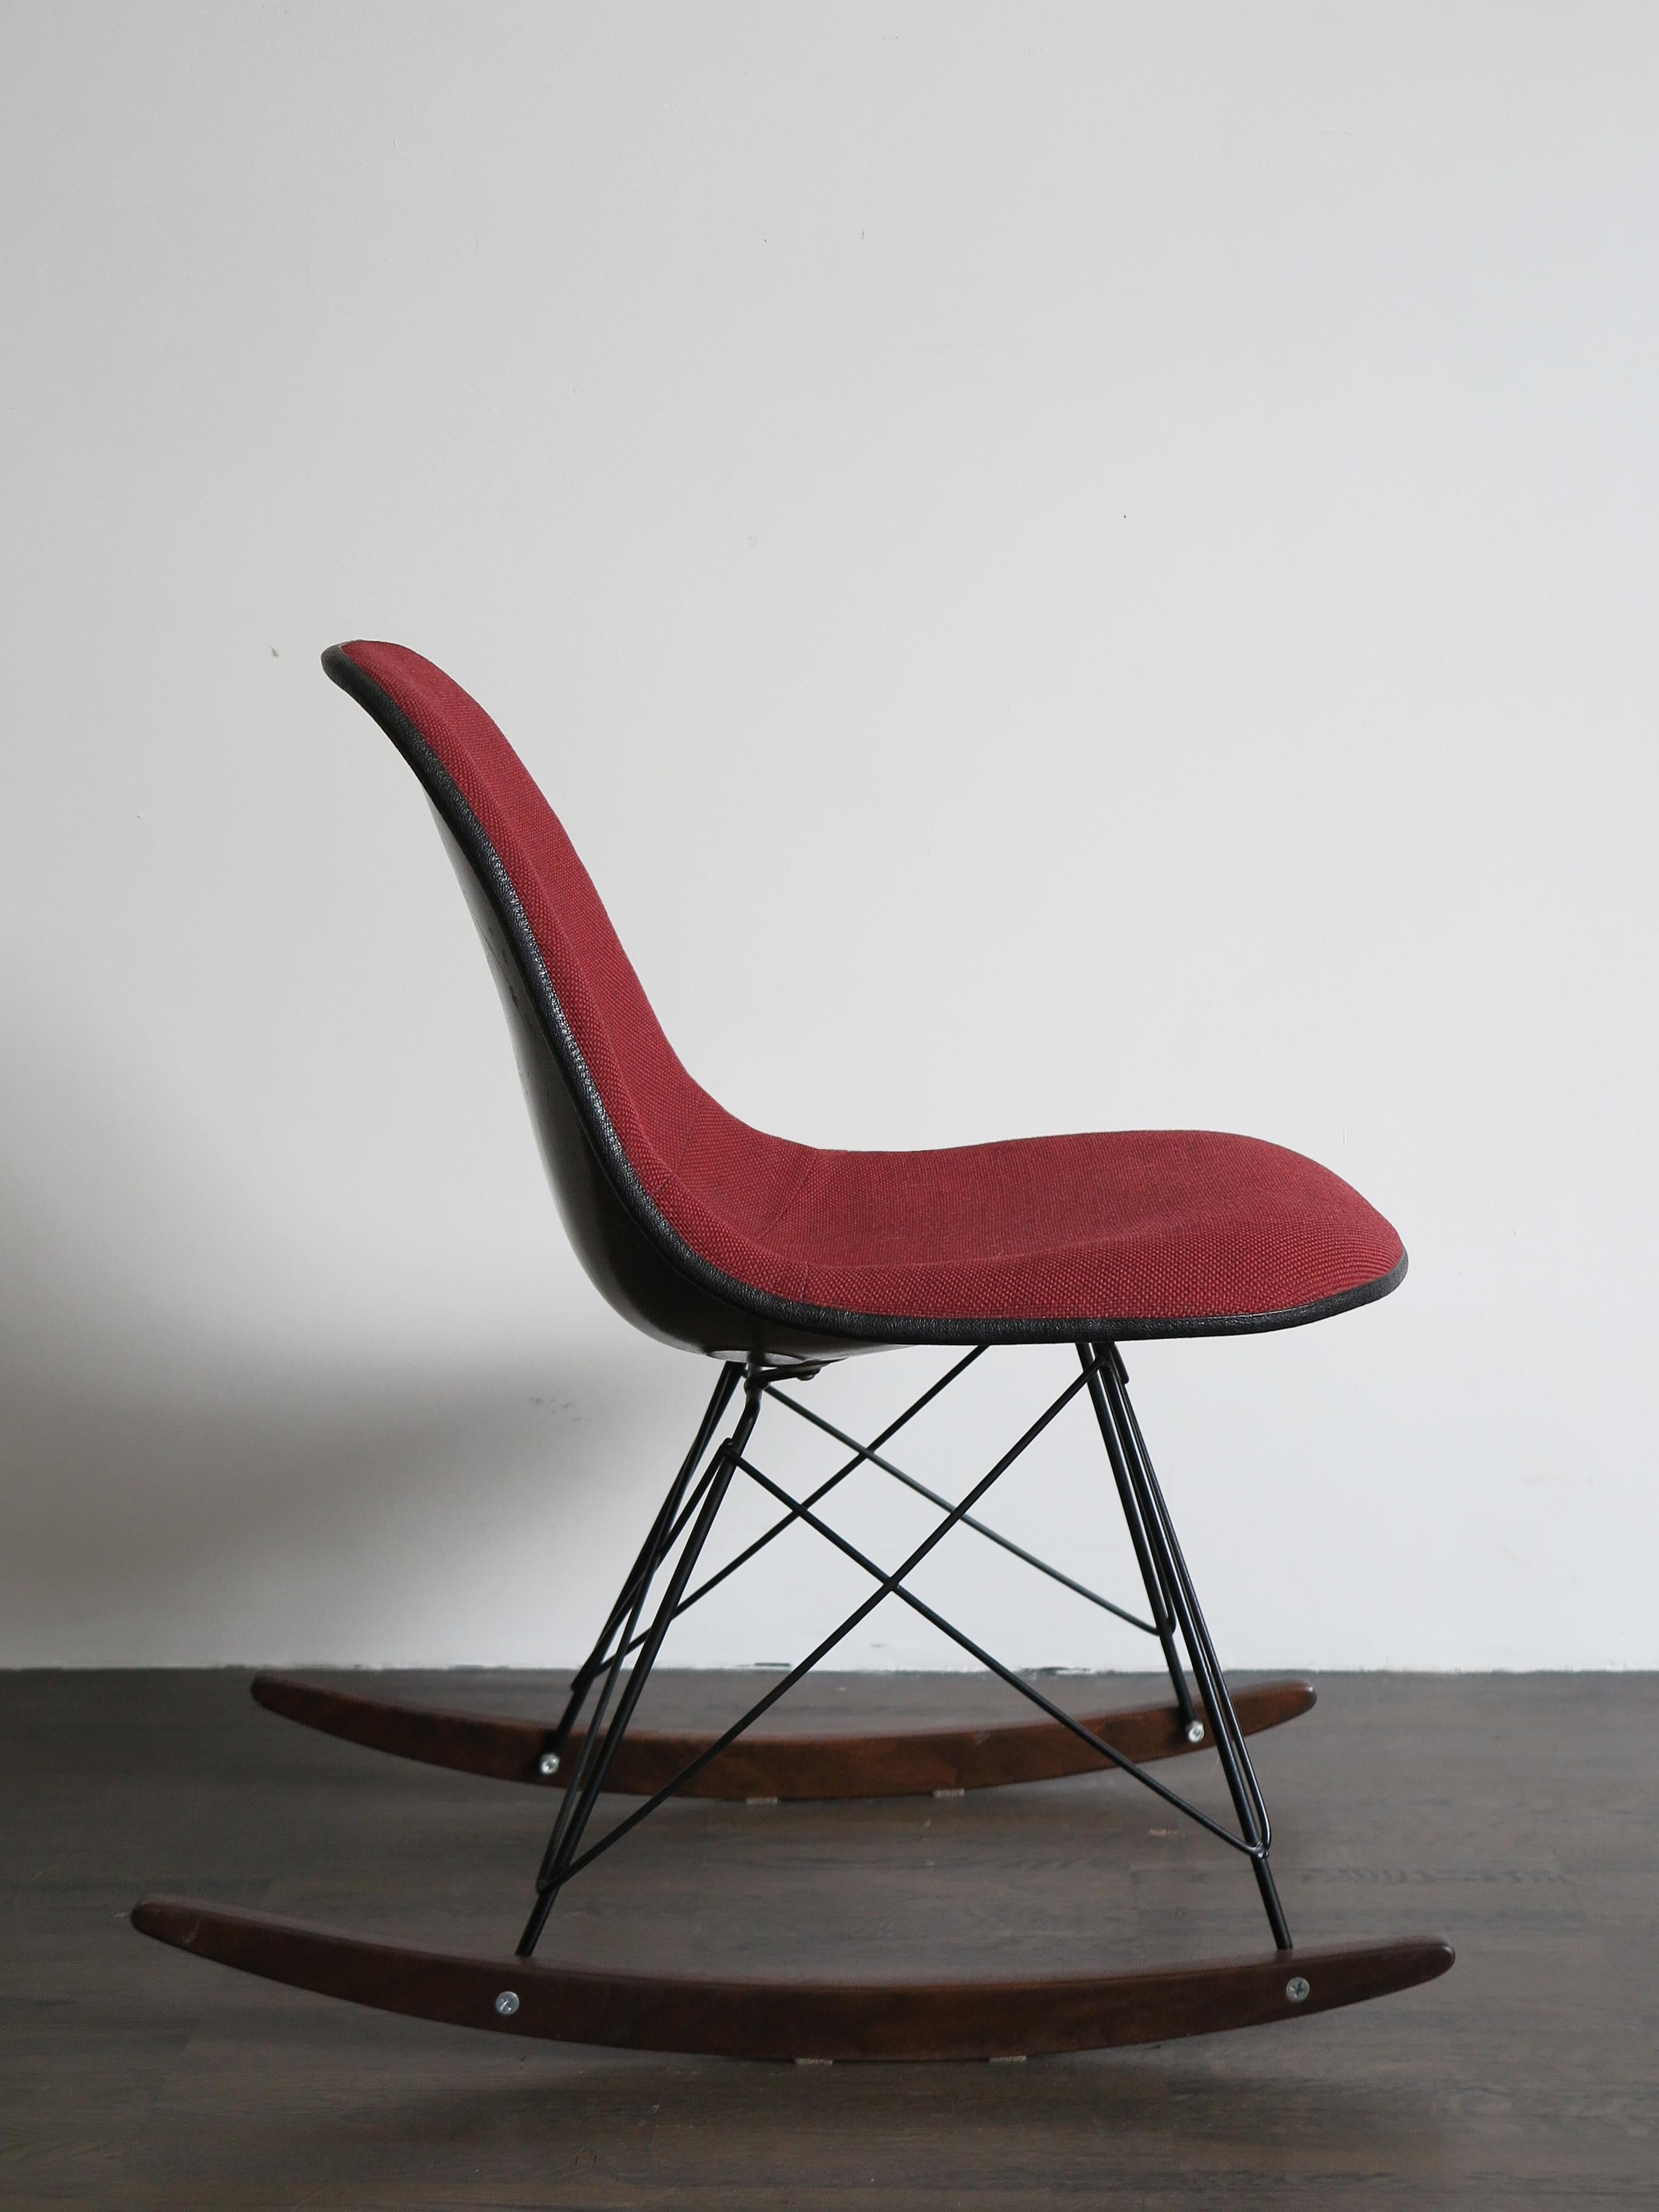 American Mid-Century Modern design rocking chair designed by Charles & Ray Eames and produced by Herman Miller with original fiberglass frame and fabric upholstered seat, refurbished and certified under seat by Herman Miller, USA 1960s

Please